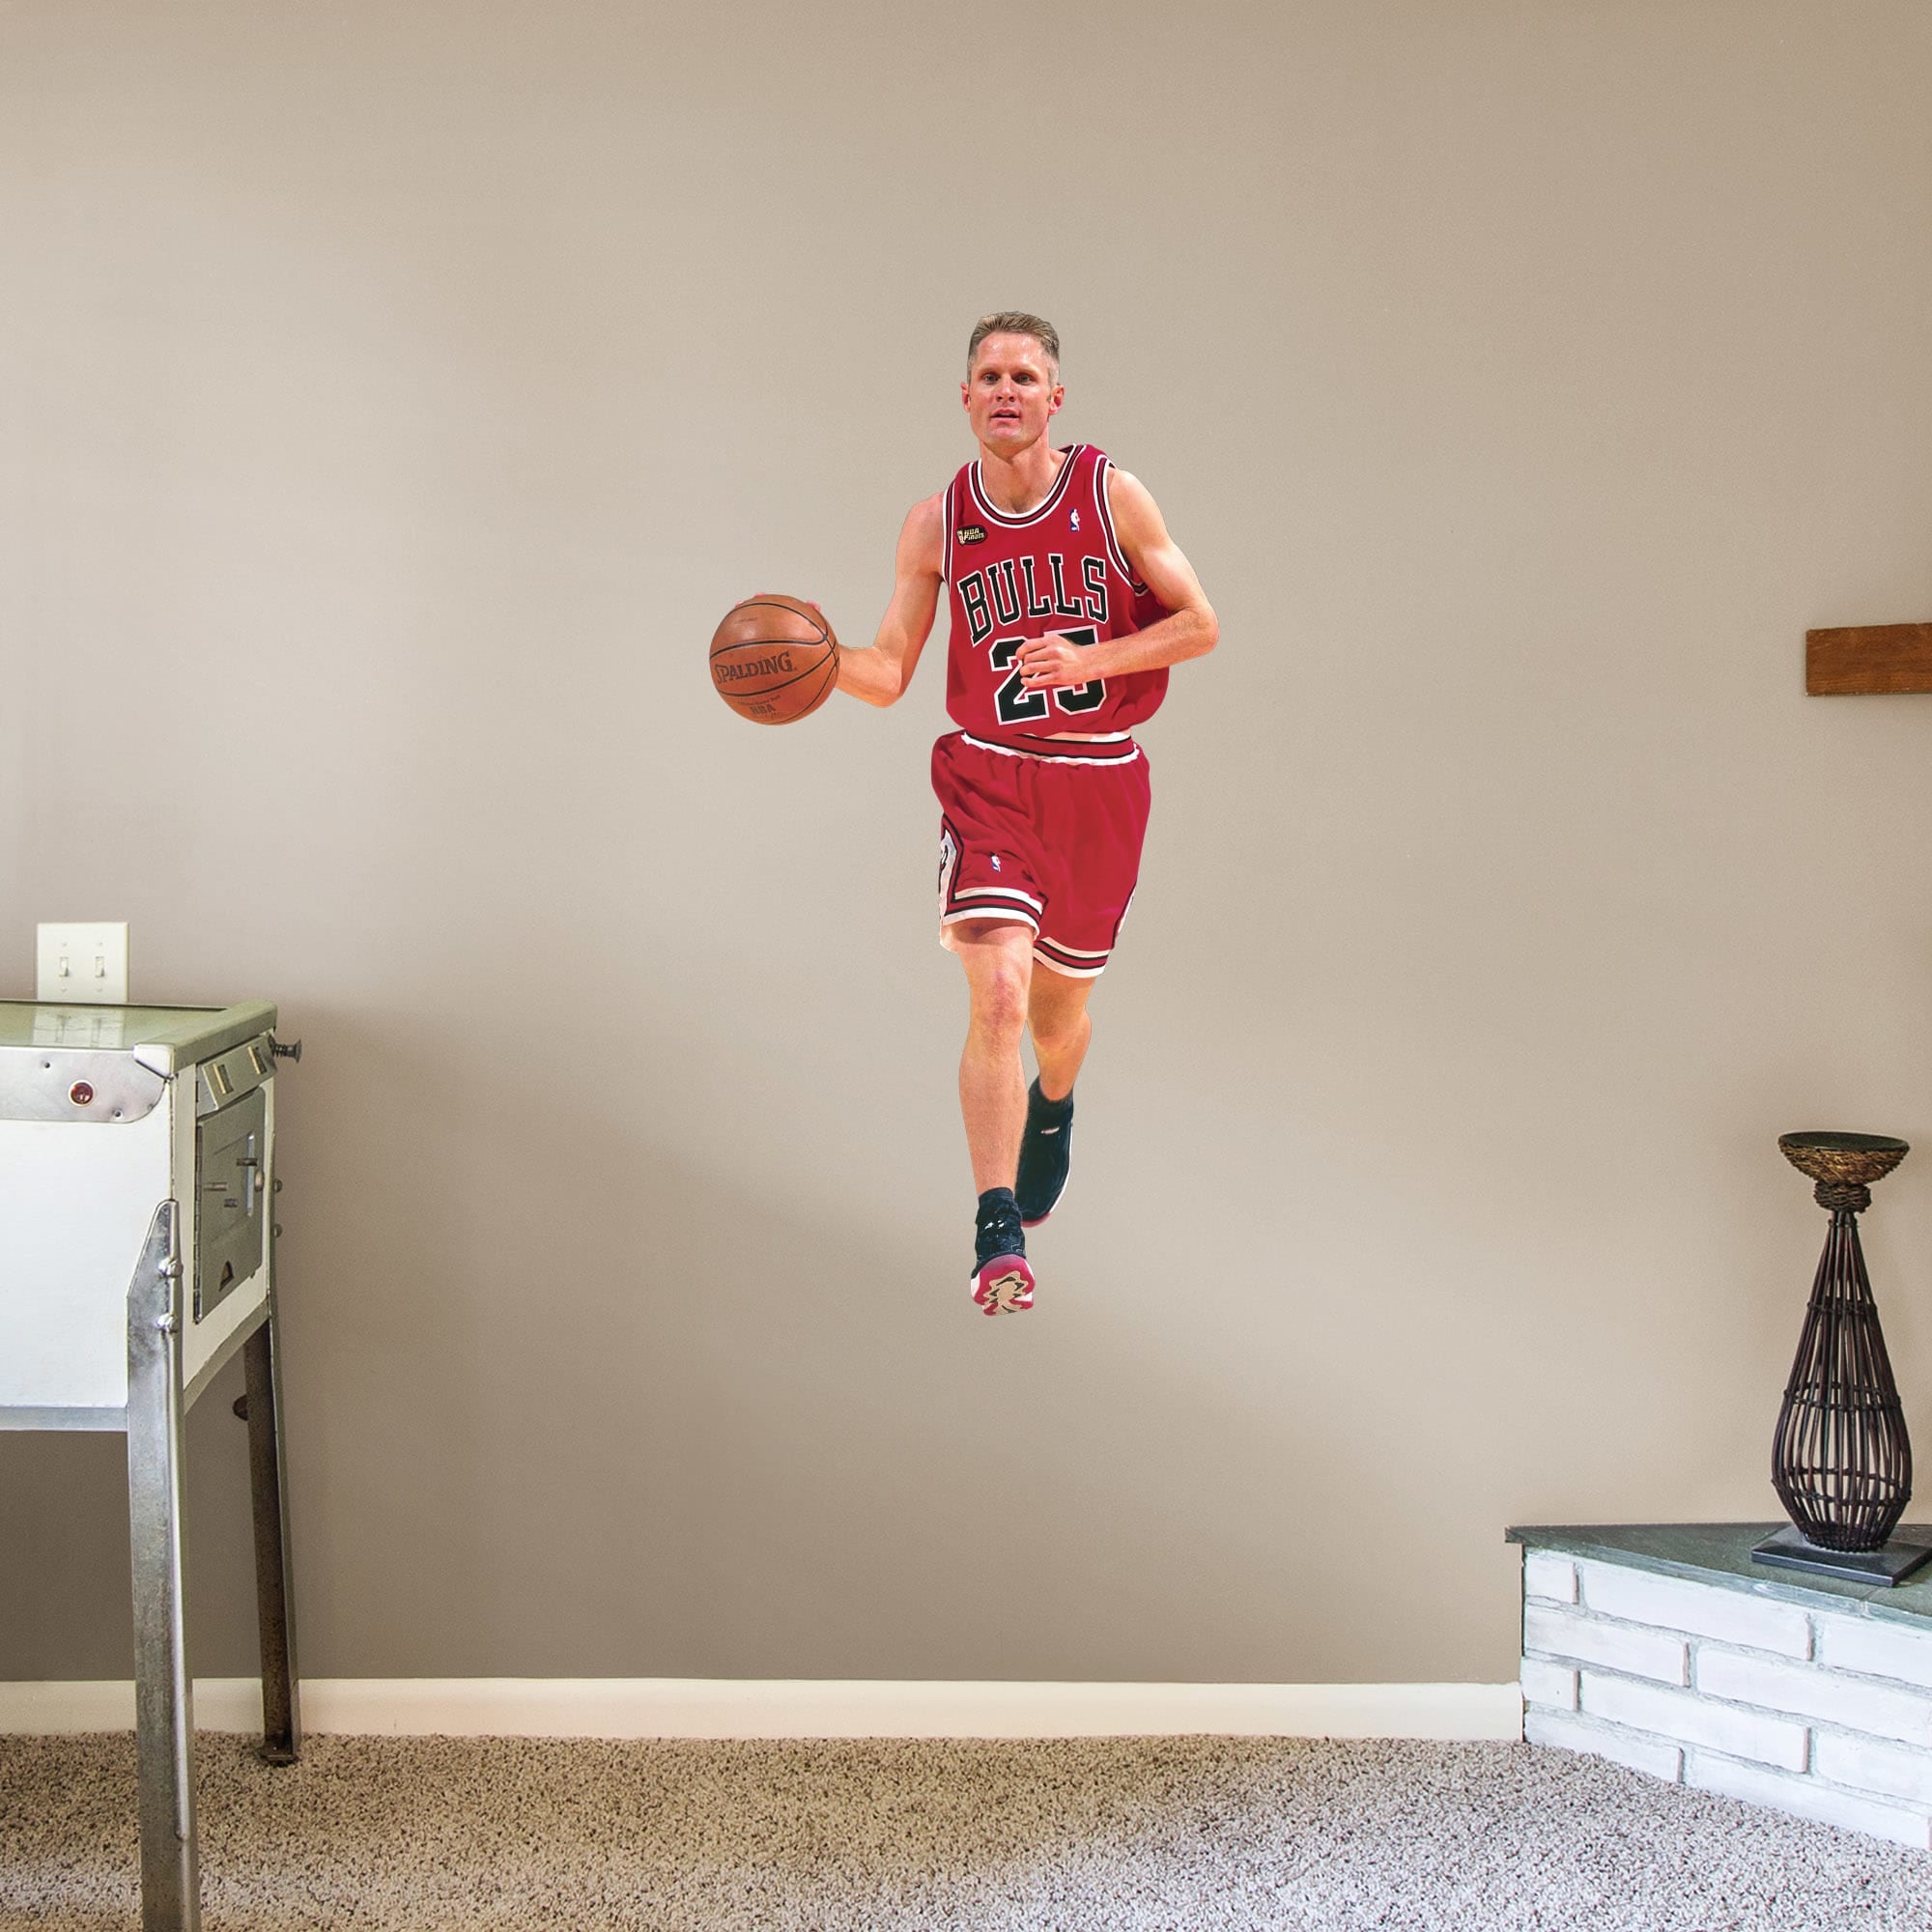 Steve Kerr for Chicago Bulls - Officially Licensed NBA Removable Wall Decal Giant Athlete + 2 Decals (26"W x 51"H) by Fathead |